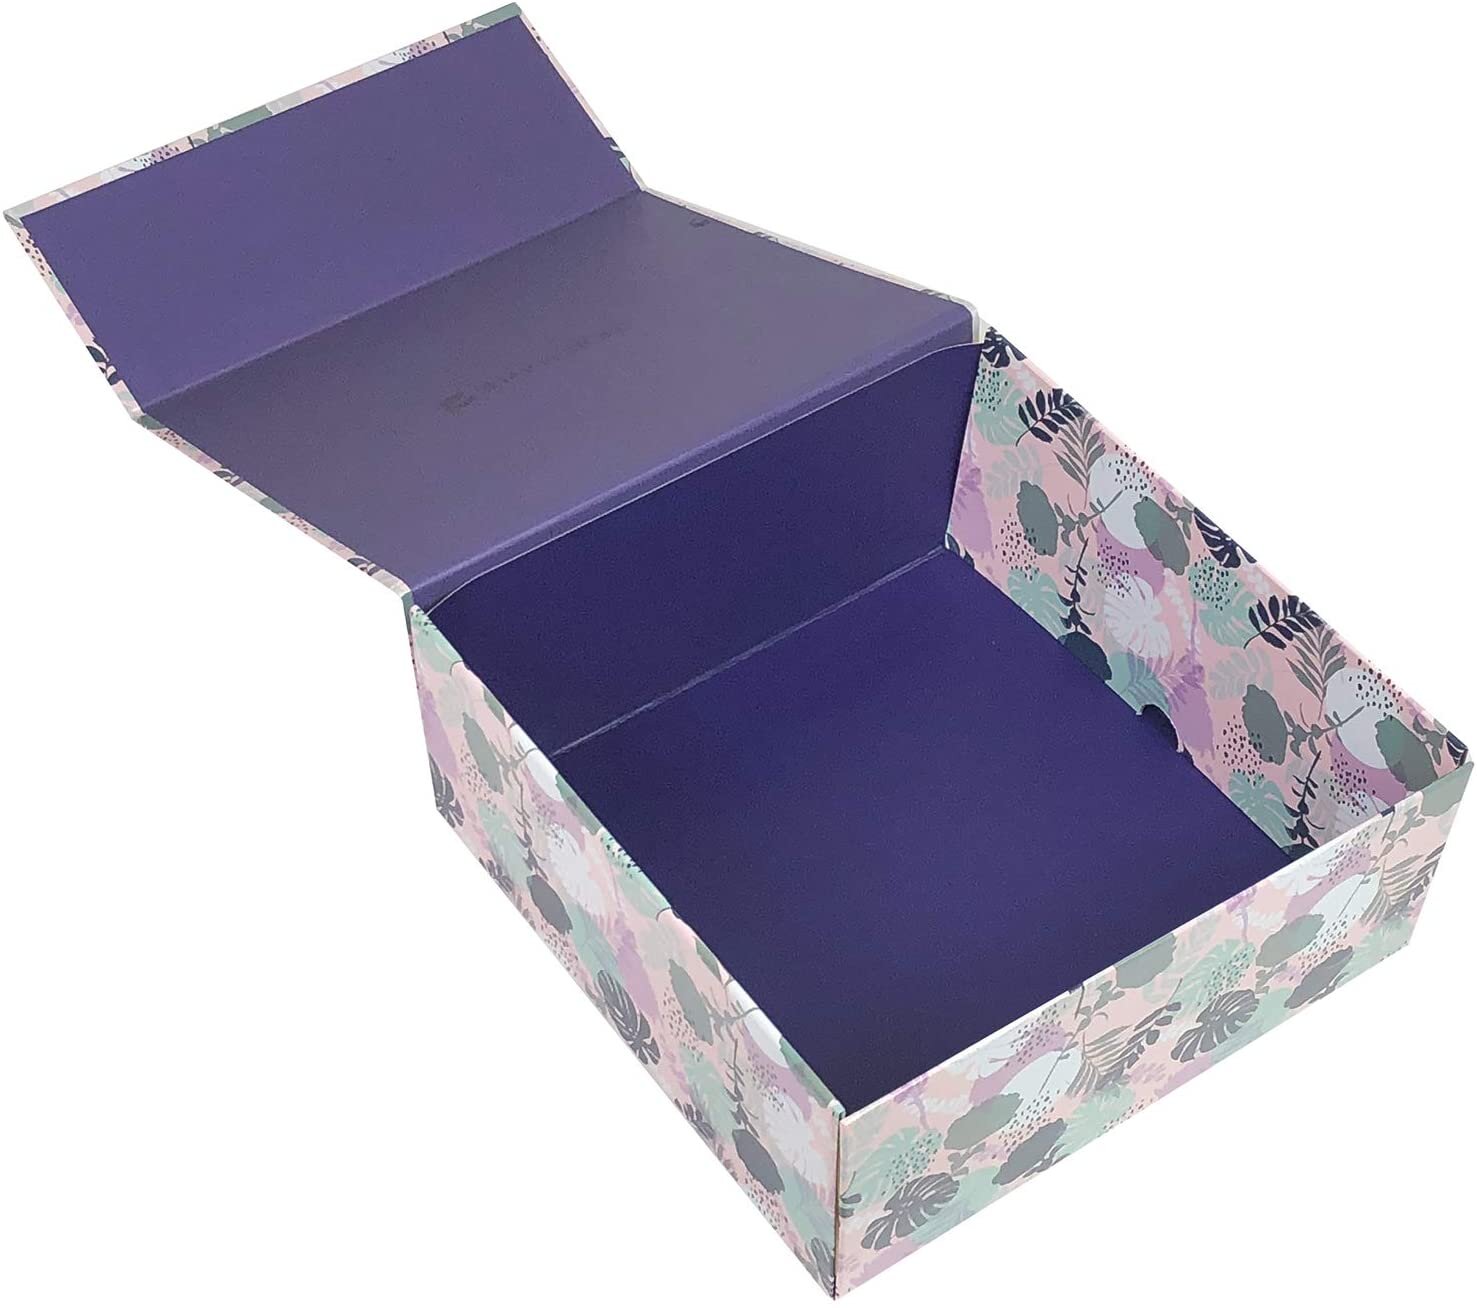 How to make organizer boxes with cardboard and lined with fabric. Cartonage  